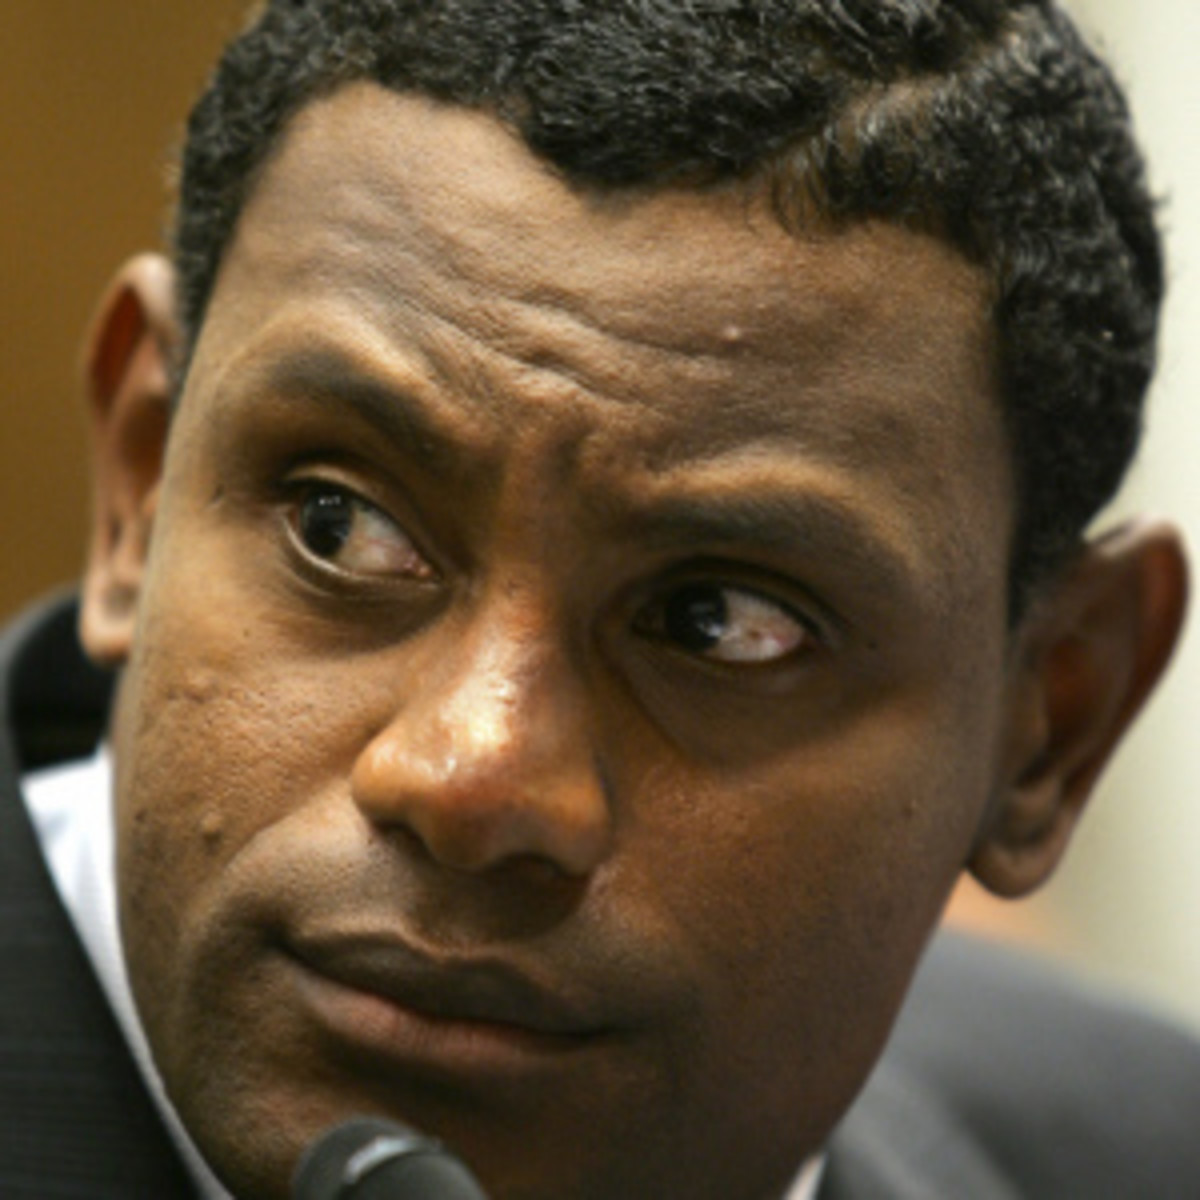 Former MLB player Sammy Sosa has purchased the rights to a needle-free injection company. (Luke Frazza/Getty Images)